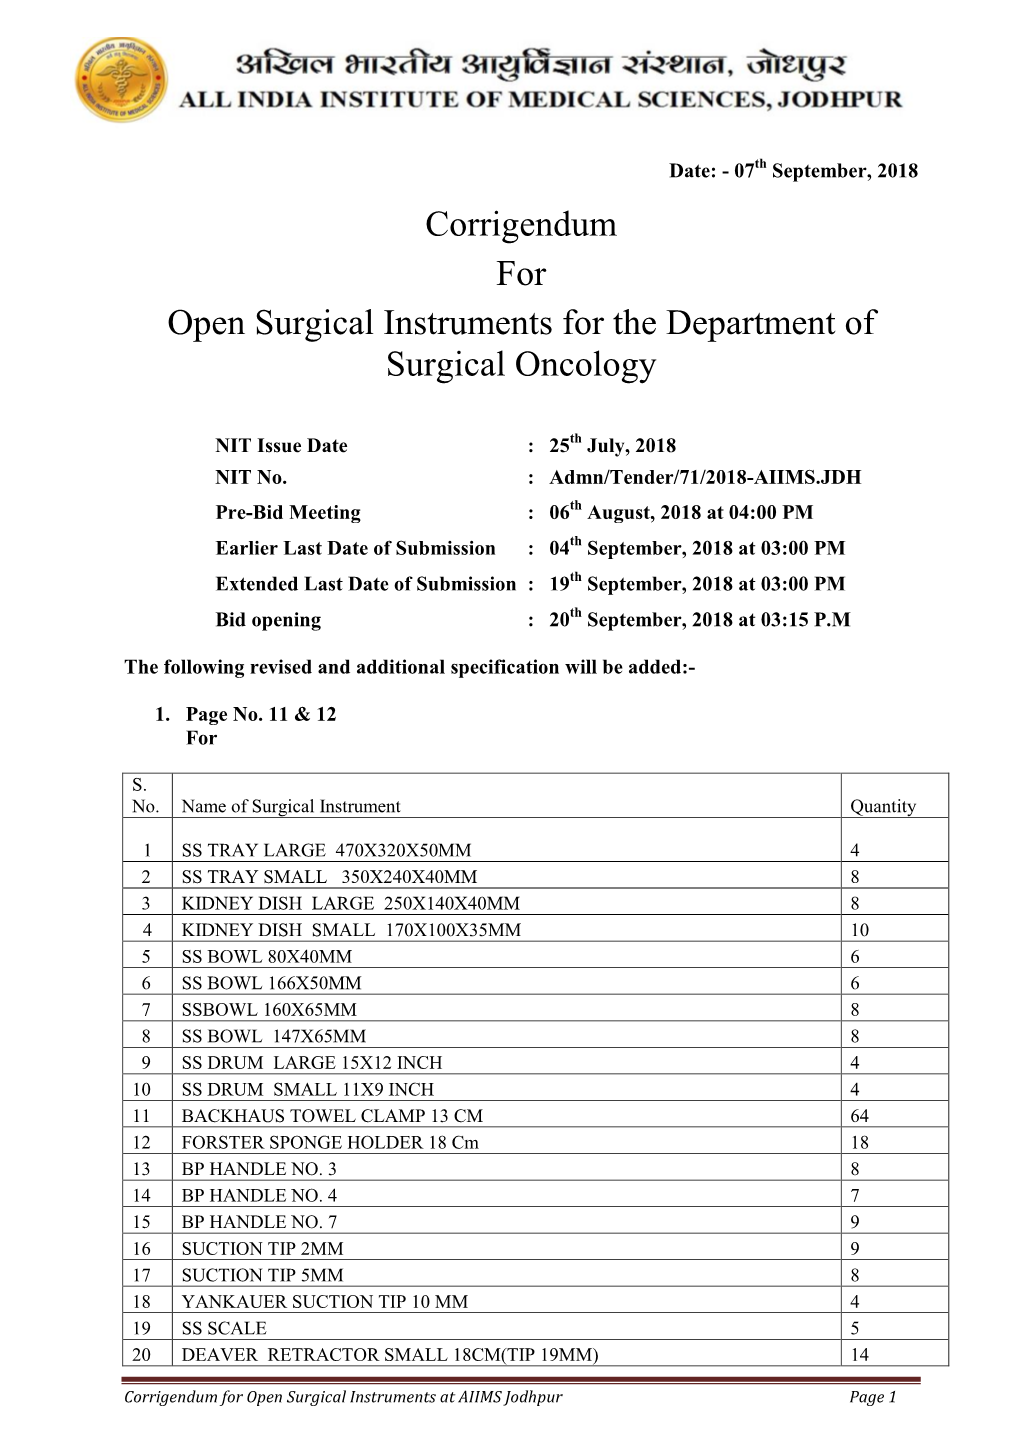 Corrigendum for Open Surgical Instruments for the Department Of